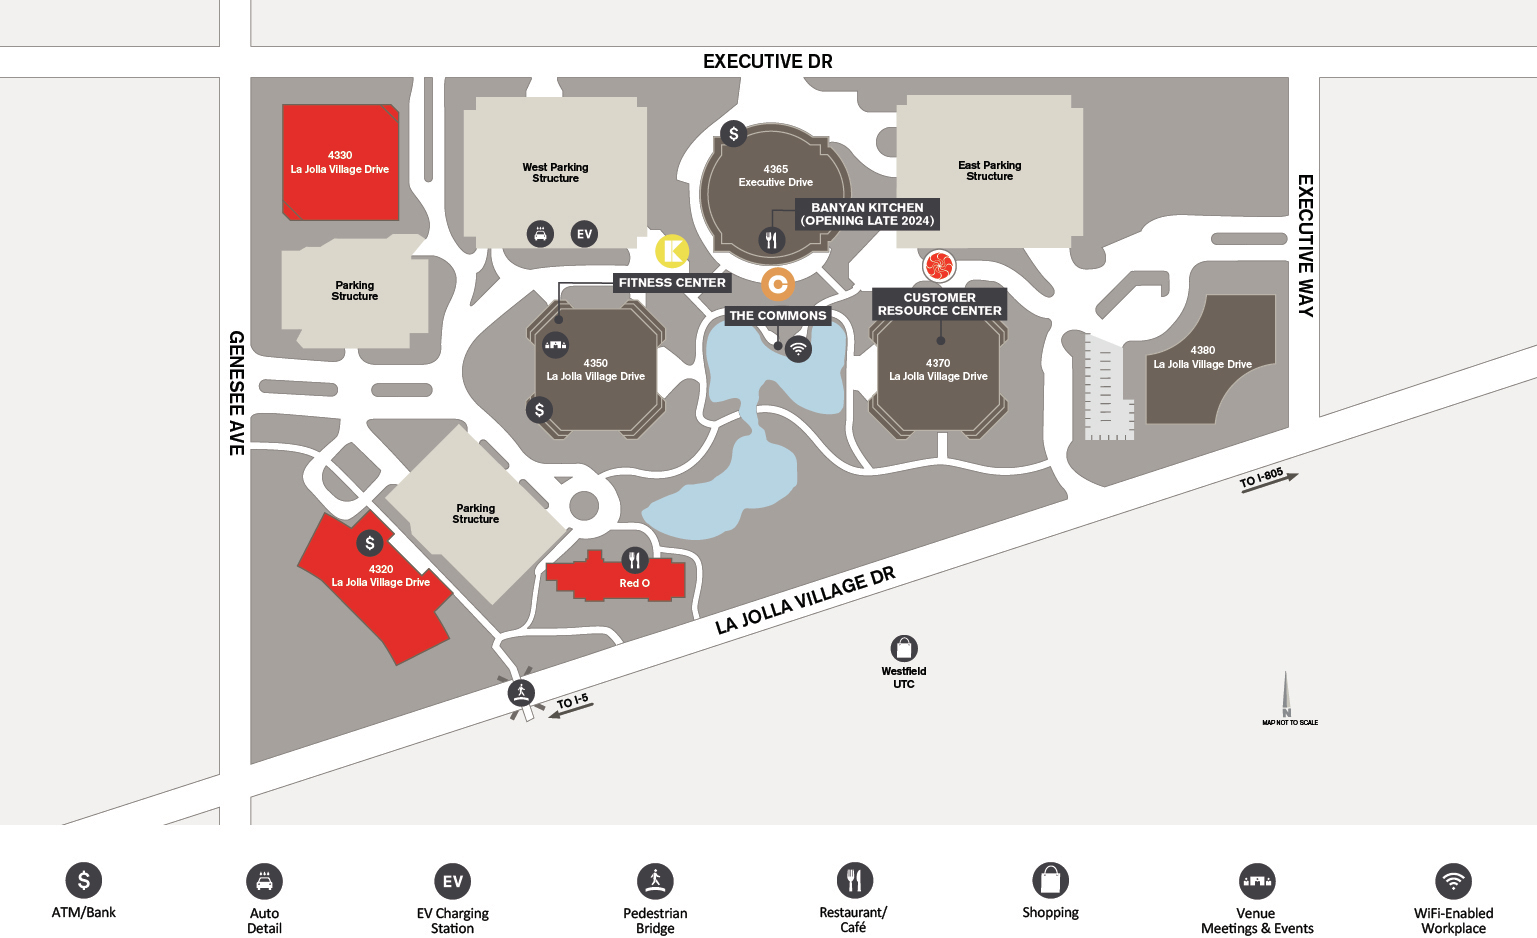 The Plaza Site Map